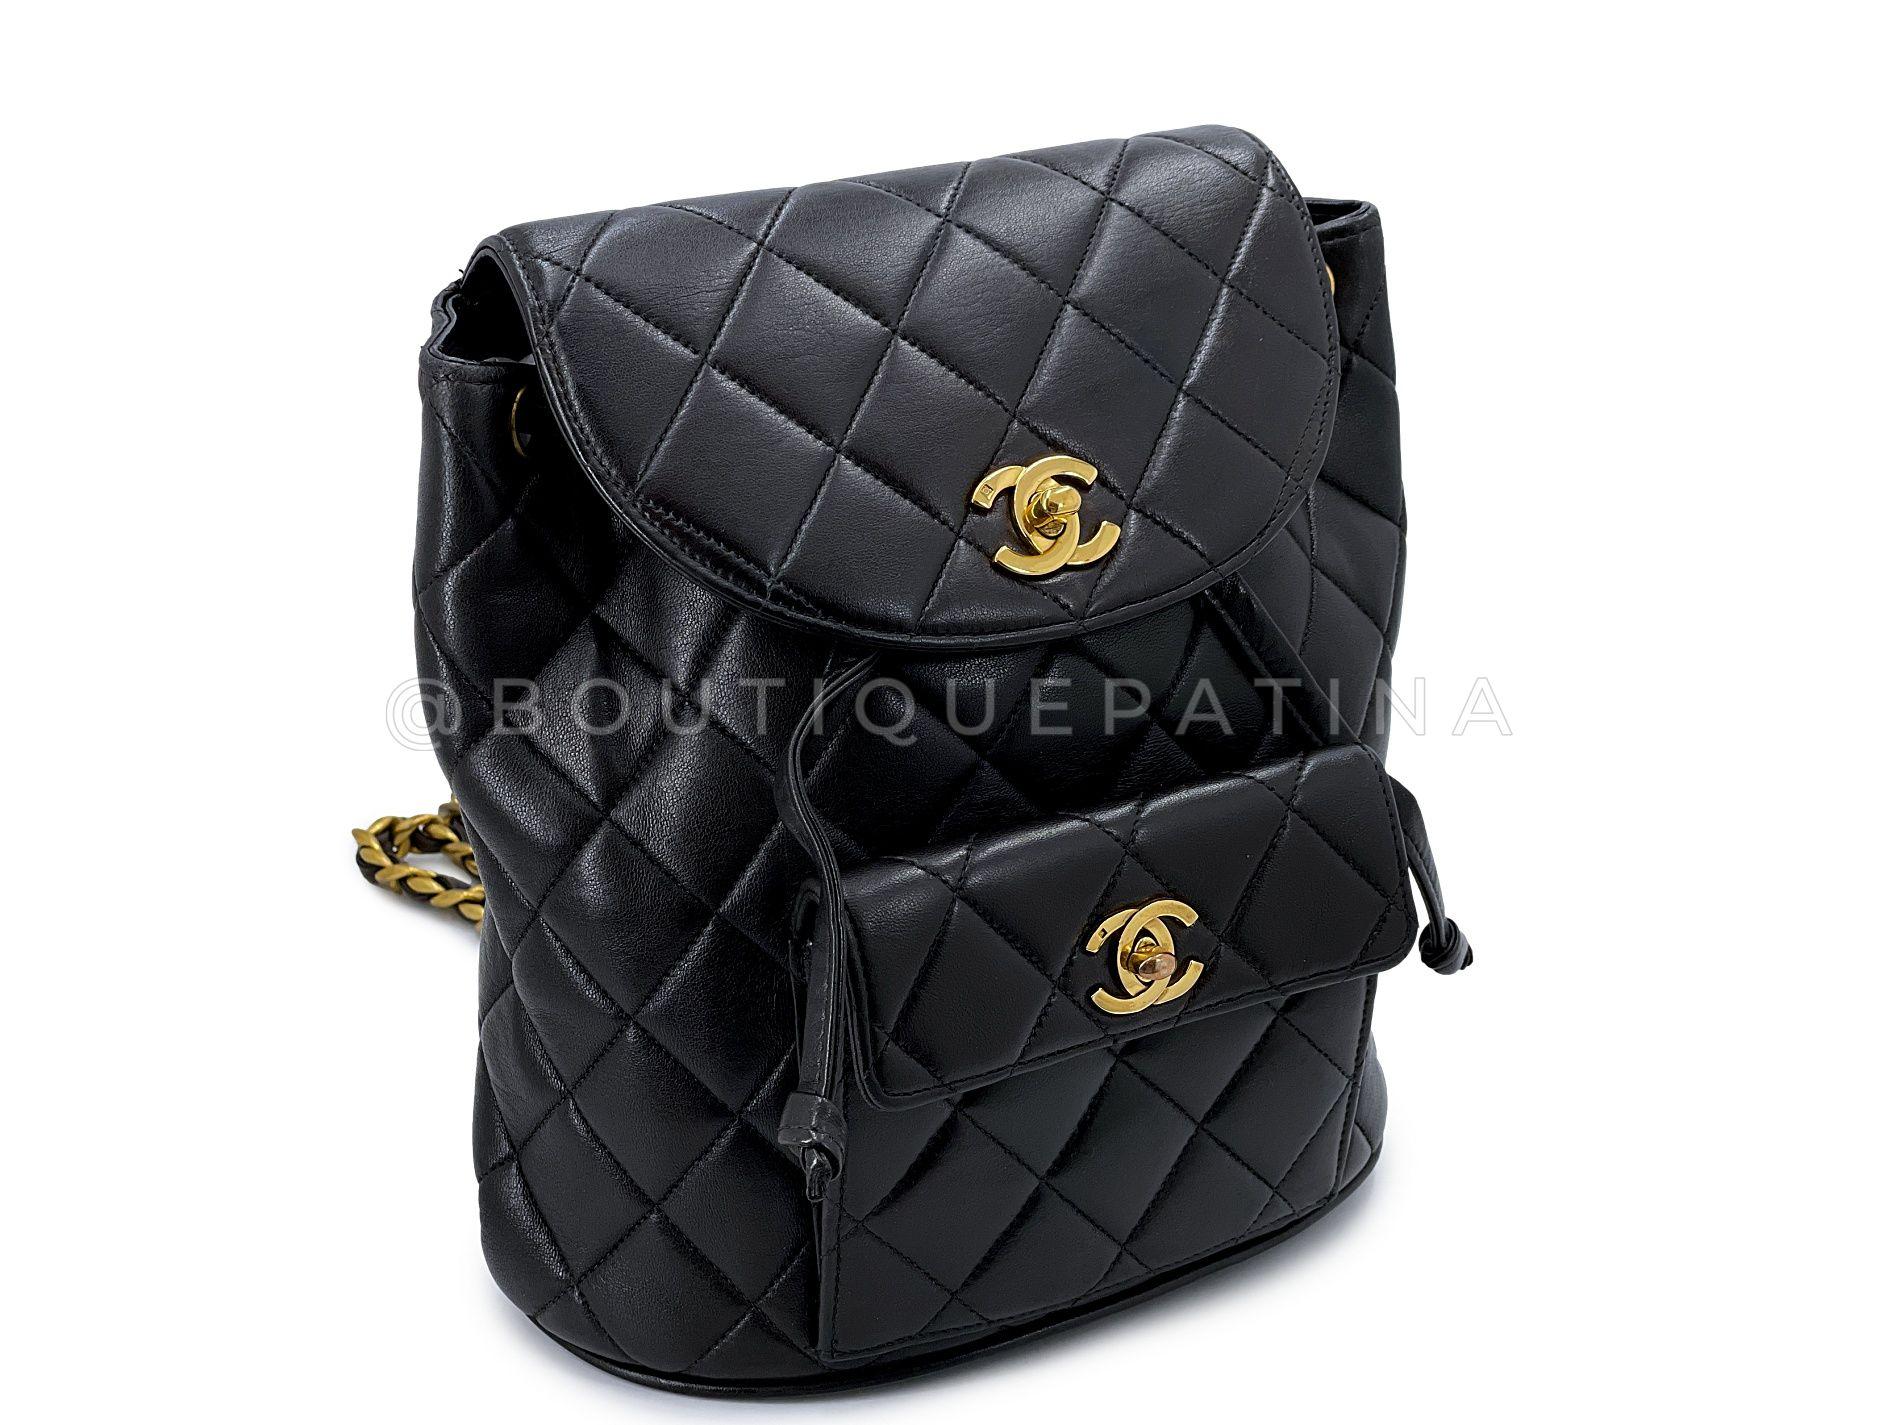 Chanel 1994 Vintage Black Lambskin Duma Backpack Bag 24k GHW 66235 In Excellent Condition For Sale In Costa Mesa, CA